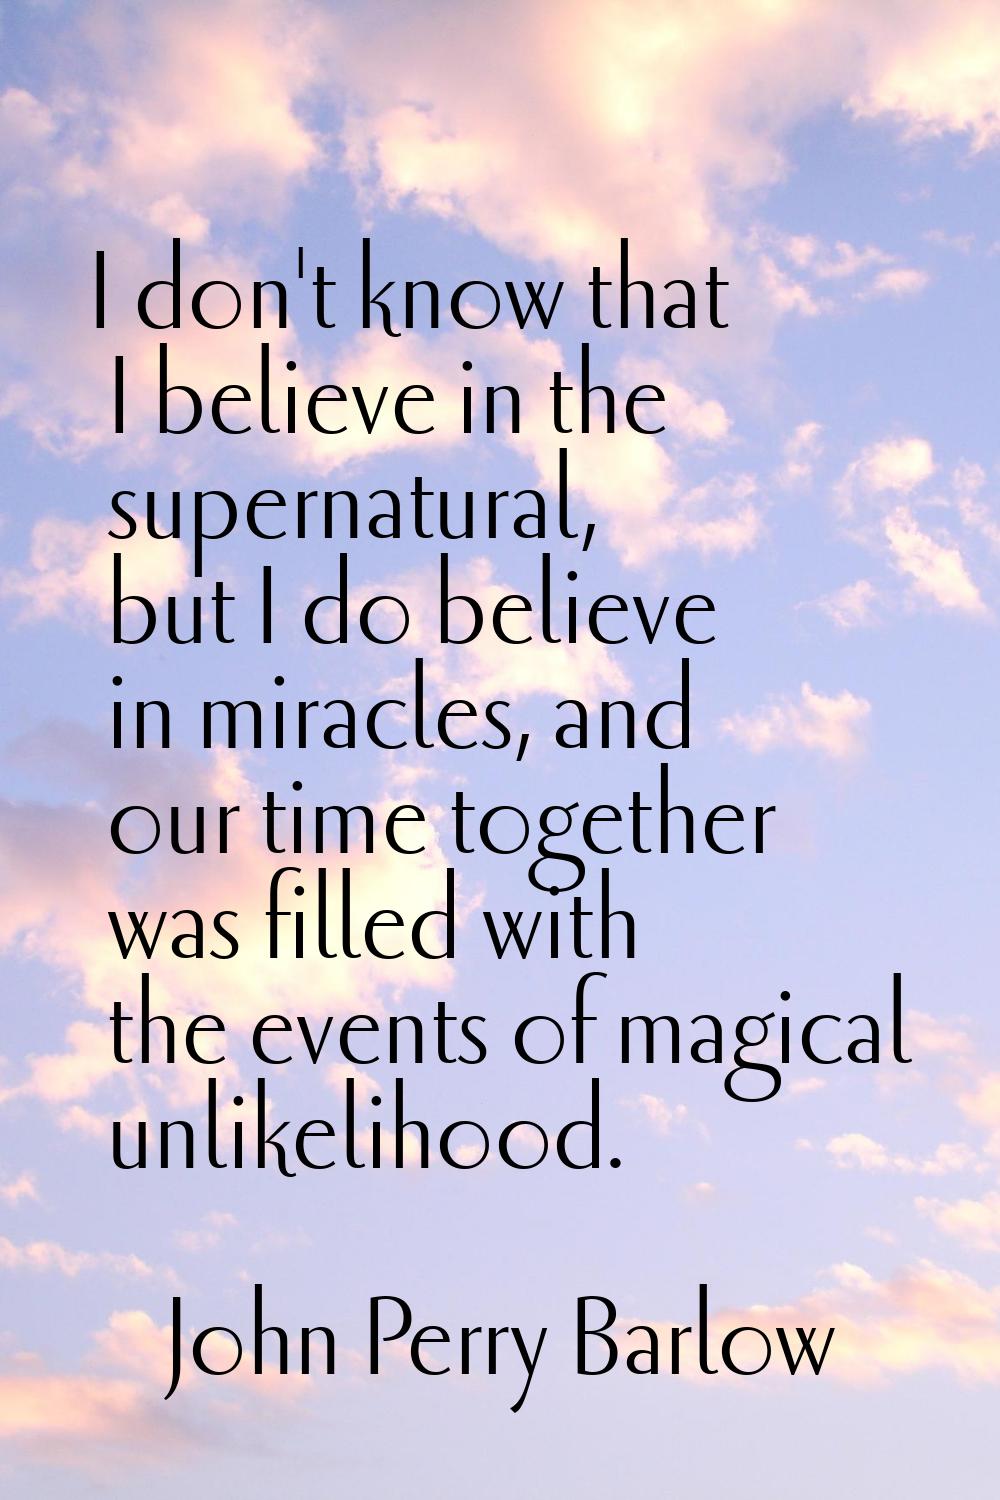 I don't know that I believe in the supernatural, but I do believe in miracles, and our time togethe